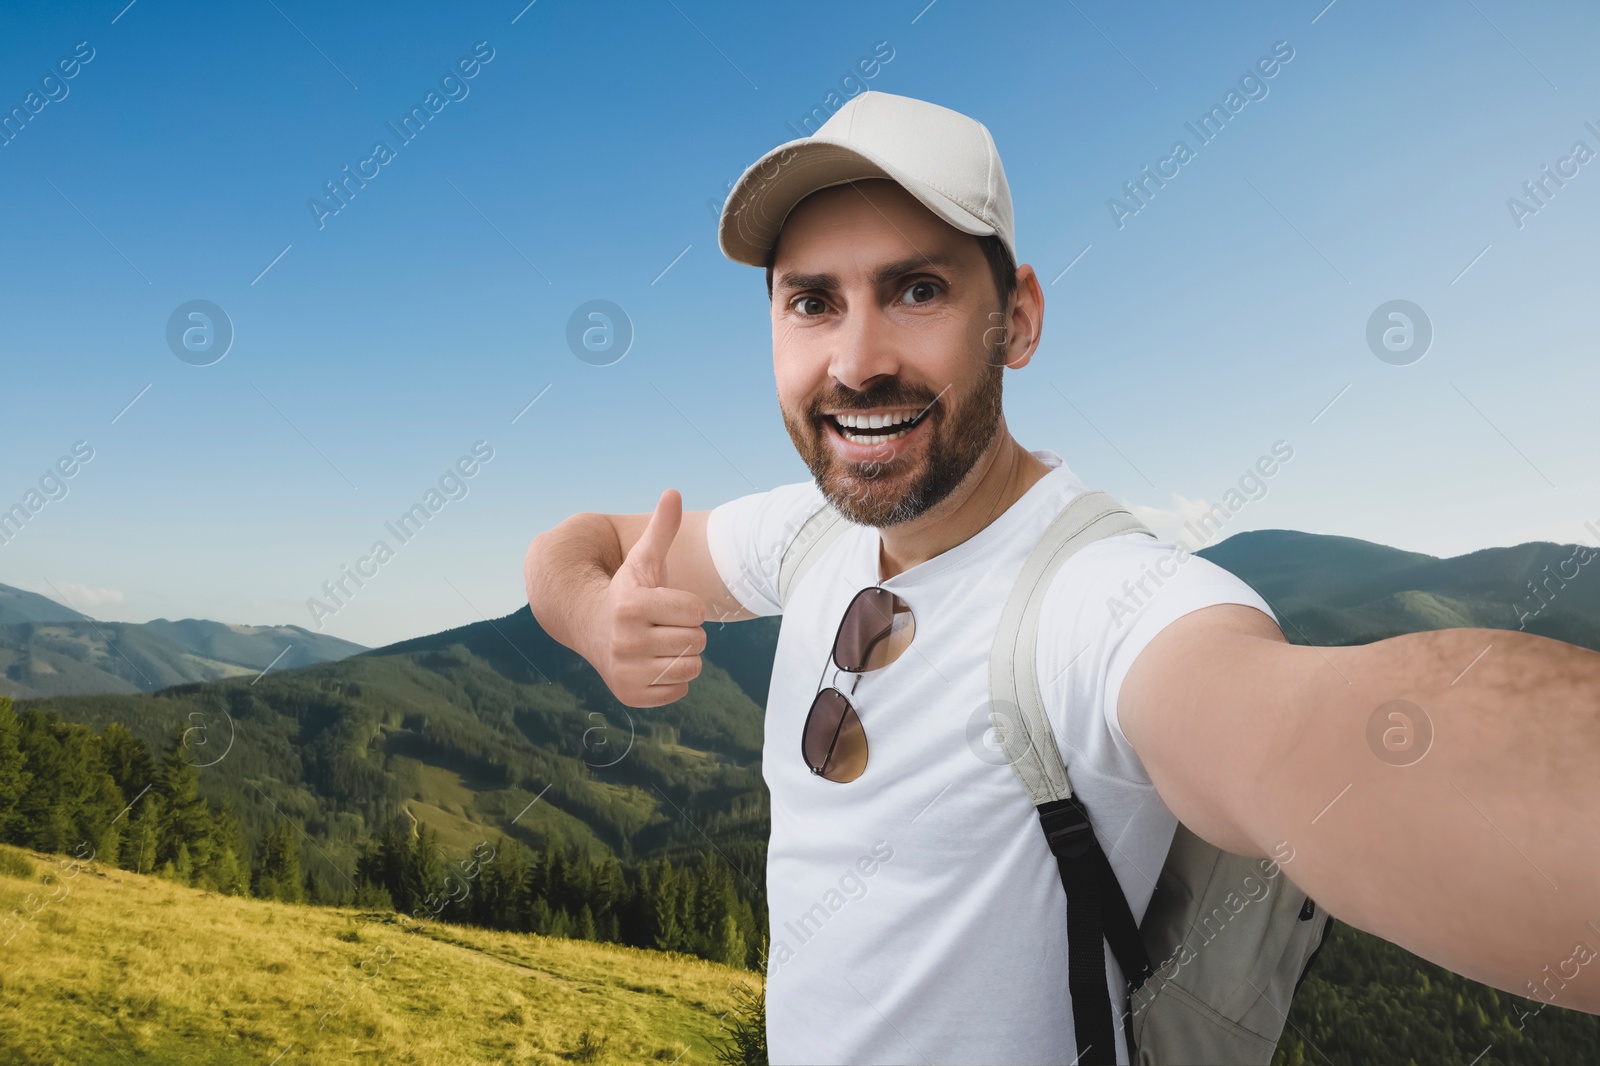 Image of Smiling man taking selfie and showing thumbs up in mountains